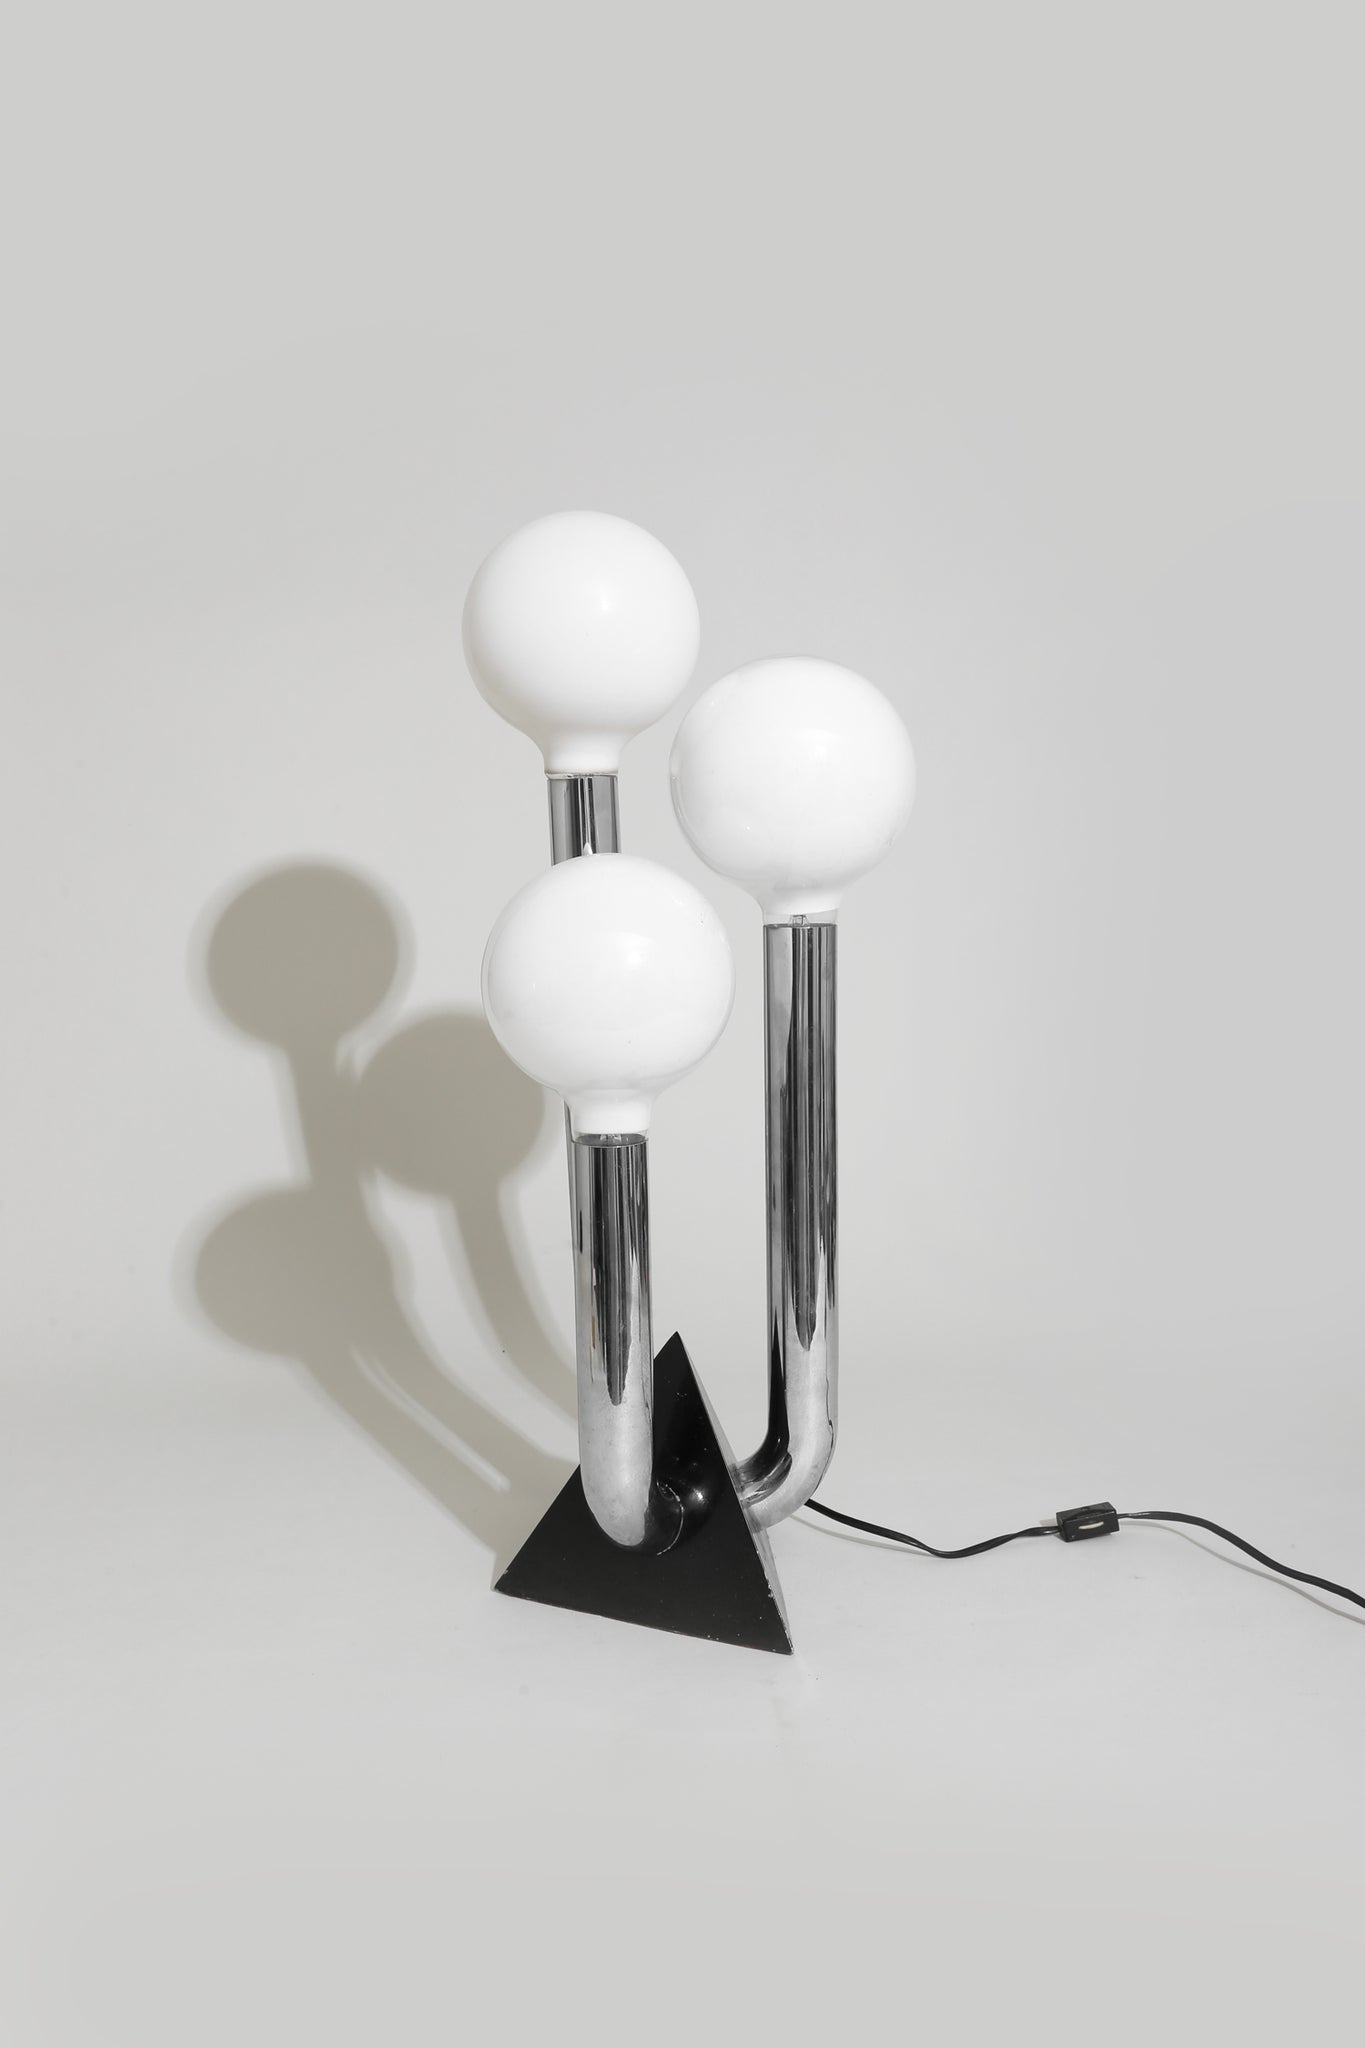 Space Age Orb Lamp